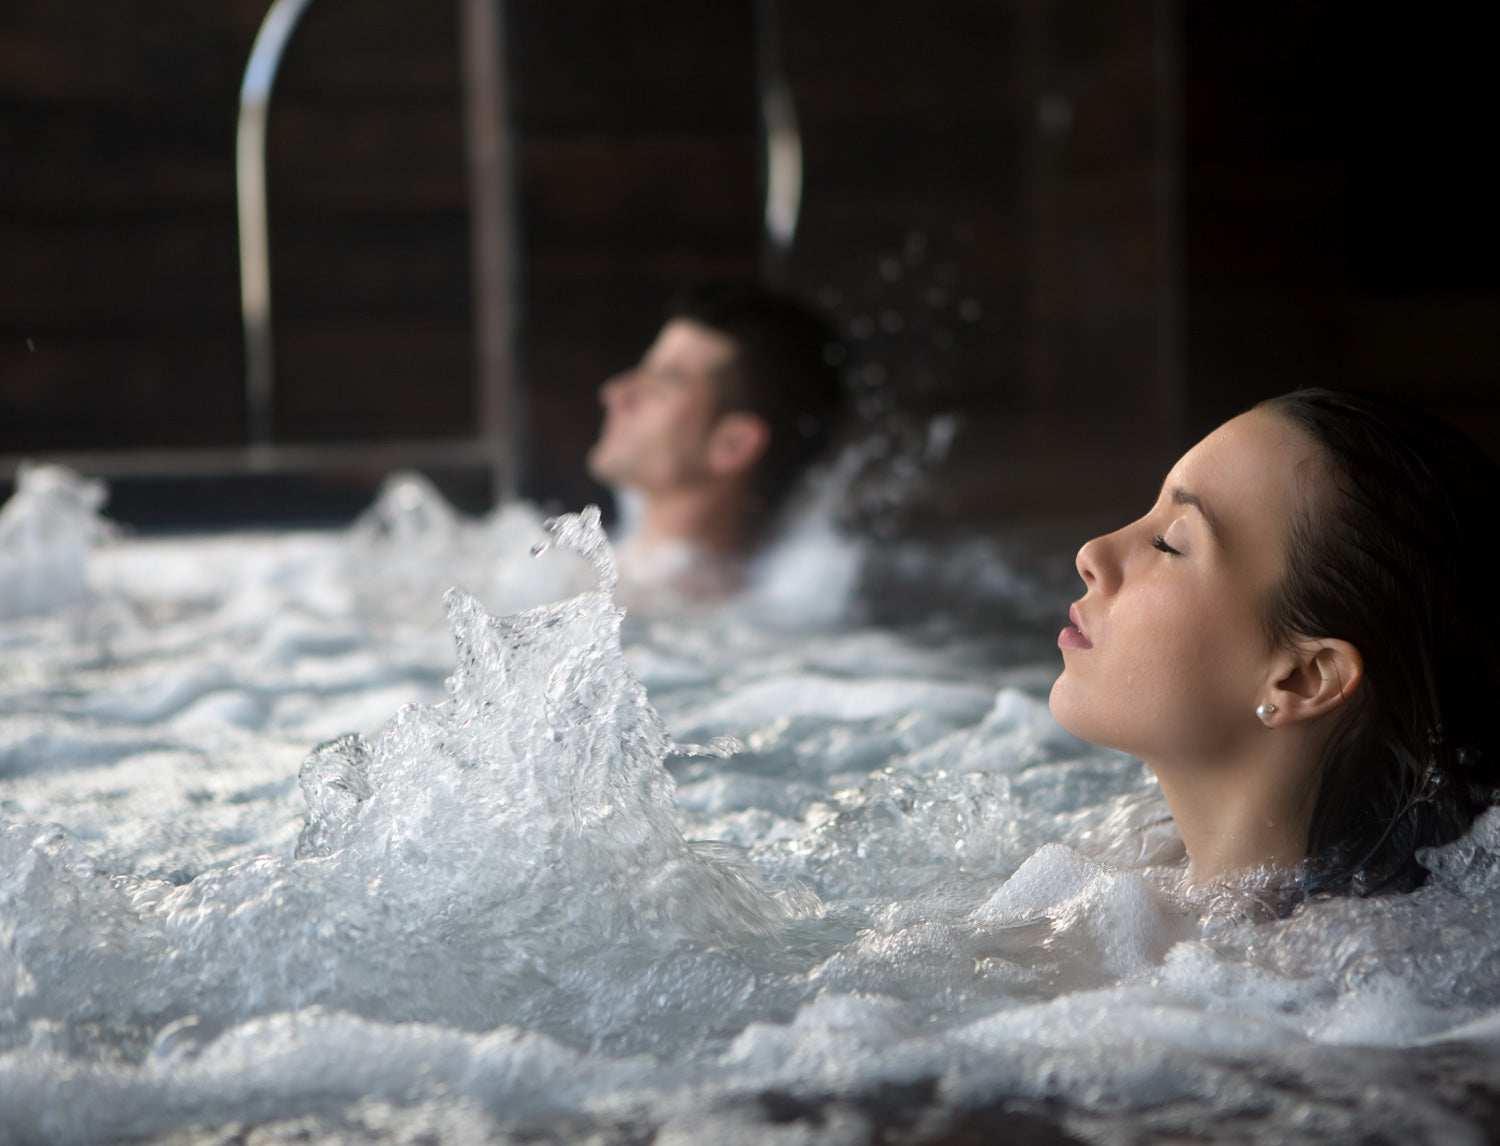 Relax into our soothing Jacuzzi